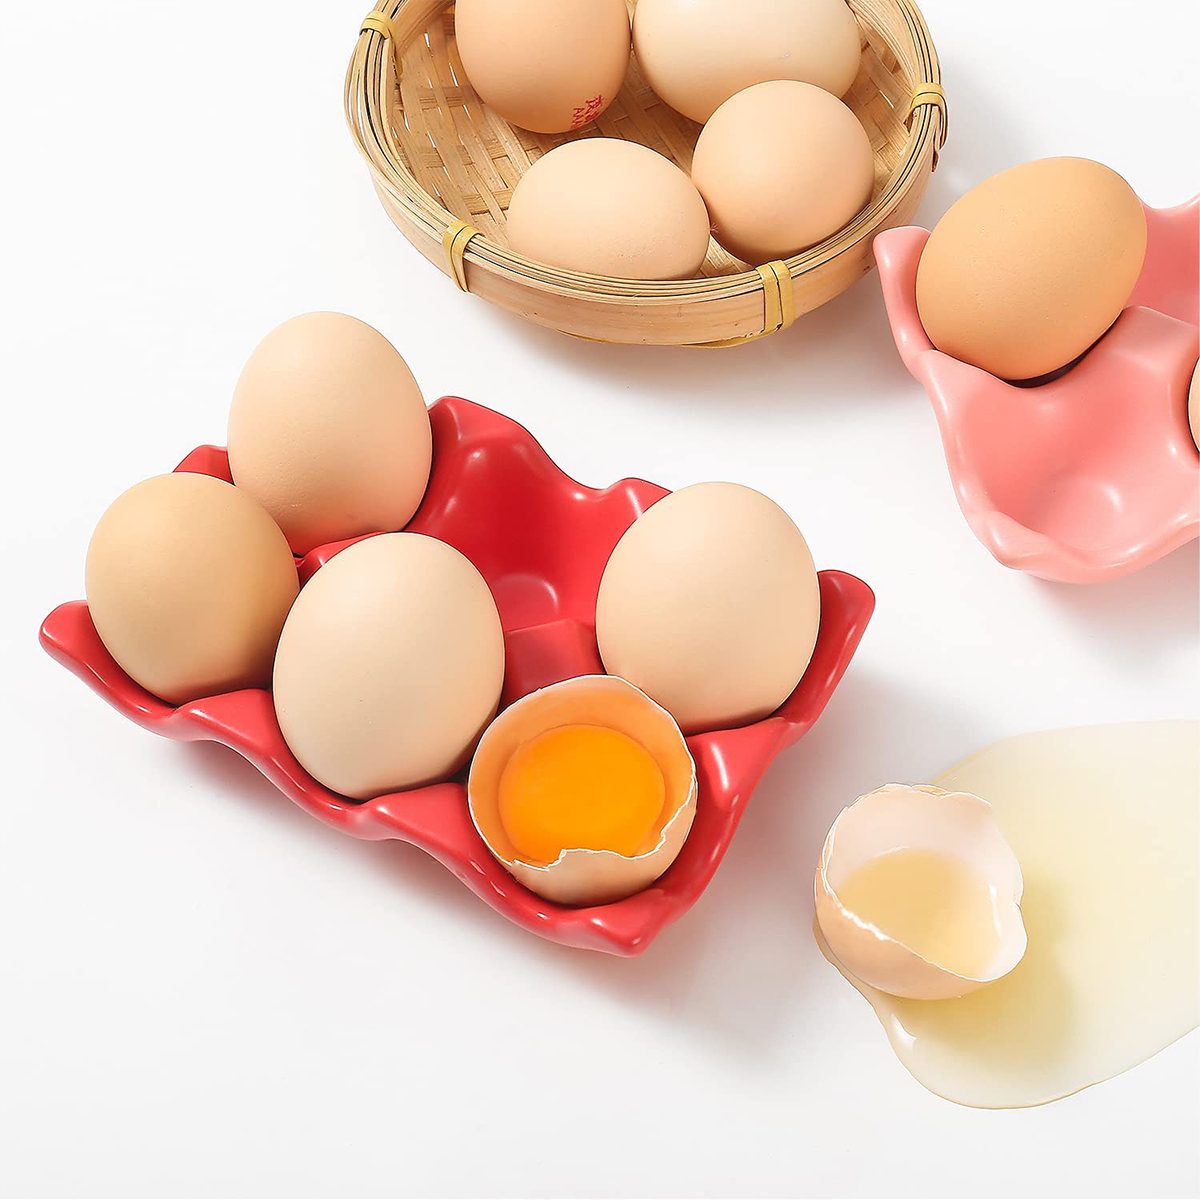 https://www.tasteofhome.com/wp-content/uploads/2023/05/This-Ceramic-Egg-Holder-Adds-a-Cool-Aesthetic-to-Your-Refrigerator_FT_via-amazon.com_.jpg